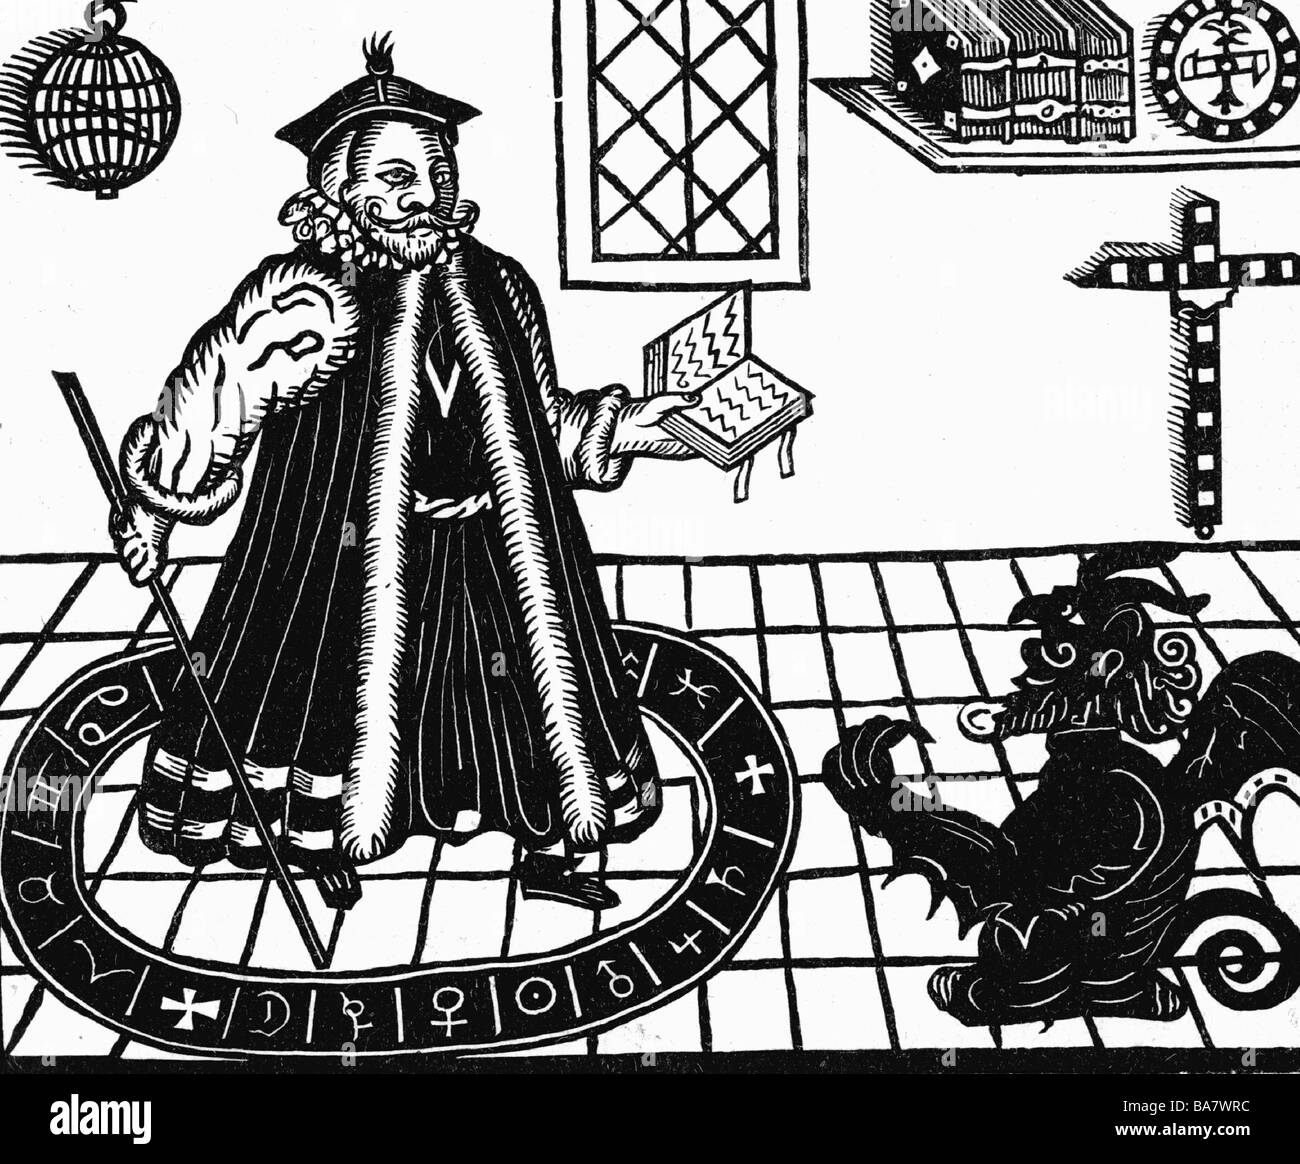 Marlowe, Christopher, 6.2.1564 - 30.5.1593, britischer Dramatiker, Werk, Detail aus 'The Tragical History of the Life and Tod of Doctor Faustus', London, 1636, Stockfoto